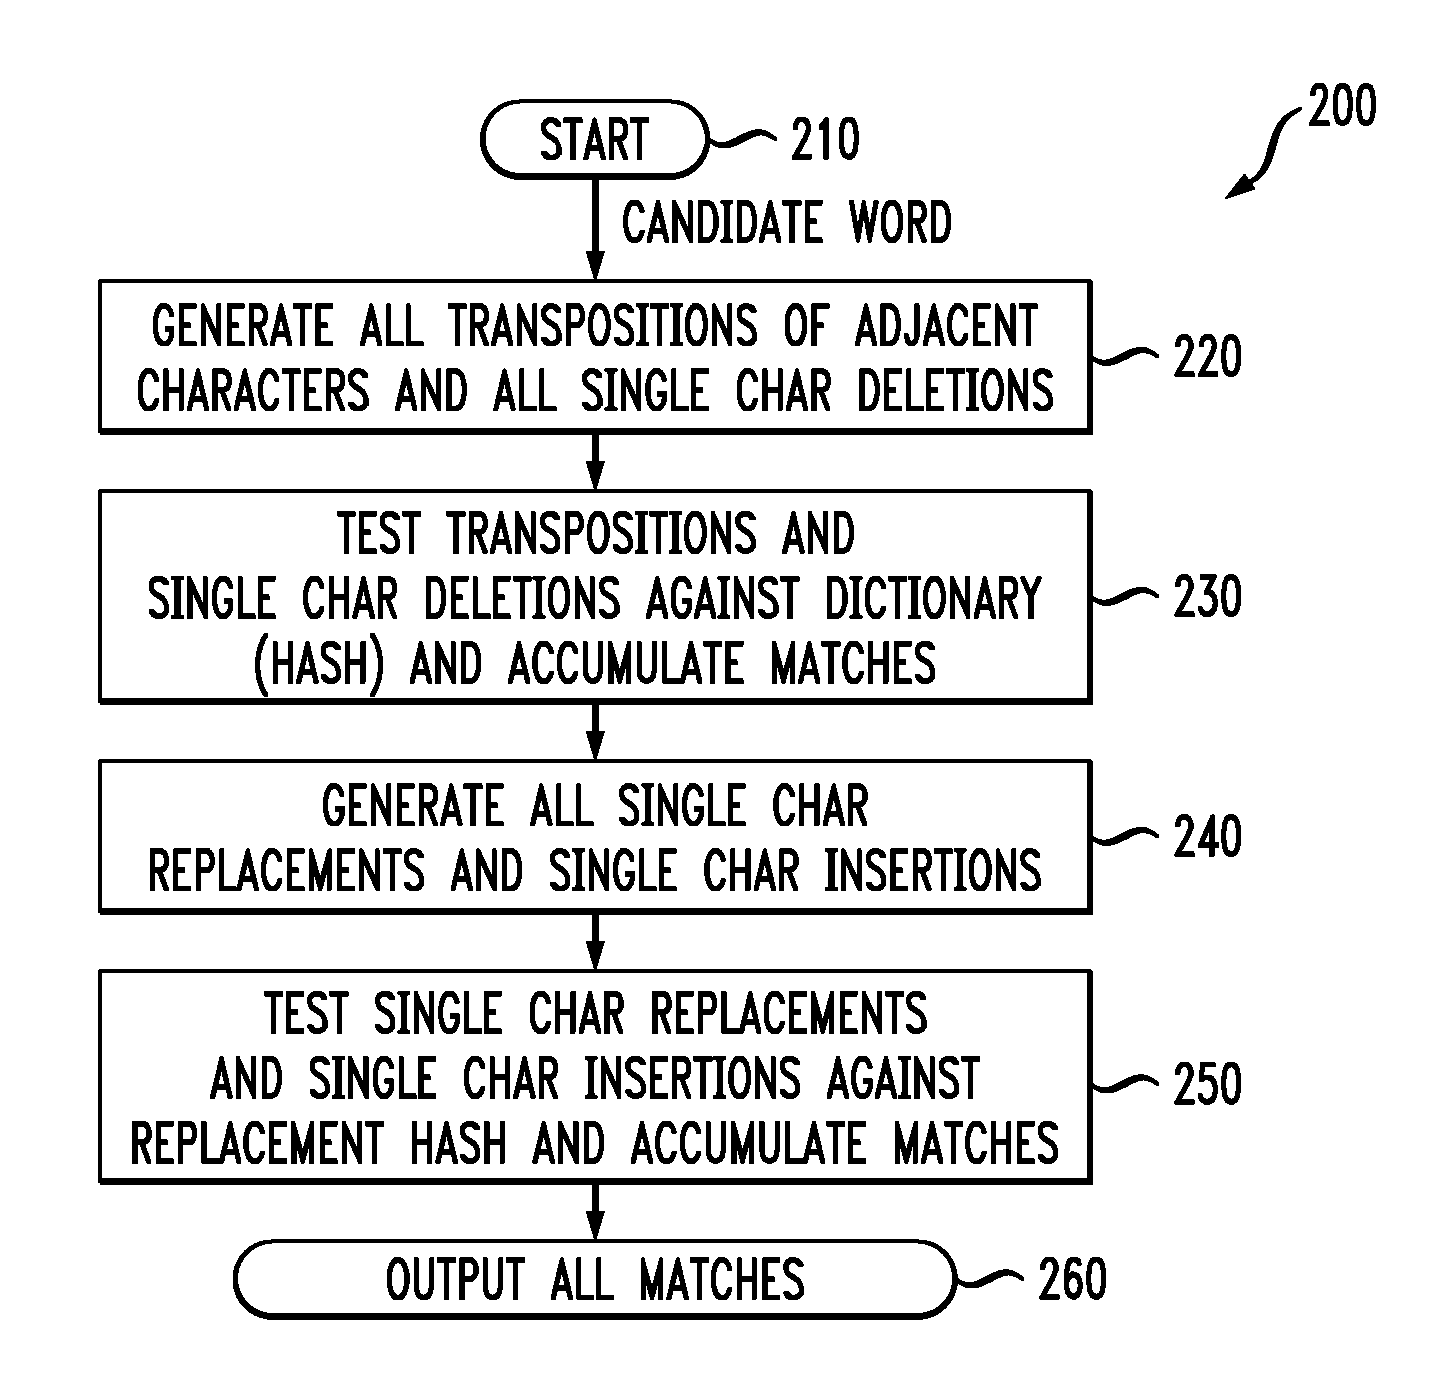 Methods and apparatus for performing spelling corrections using one or more variant hash tables